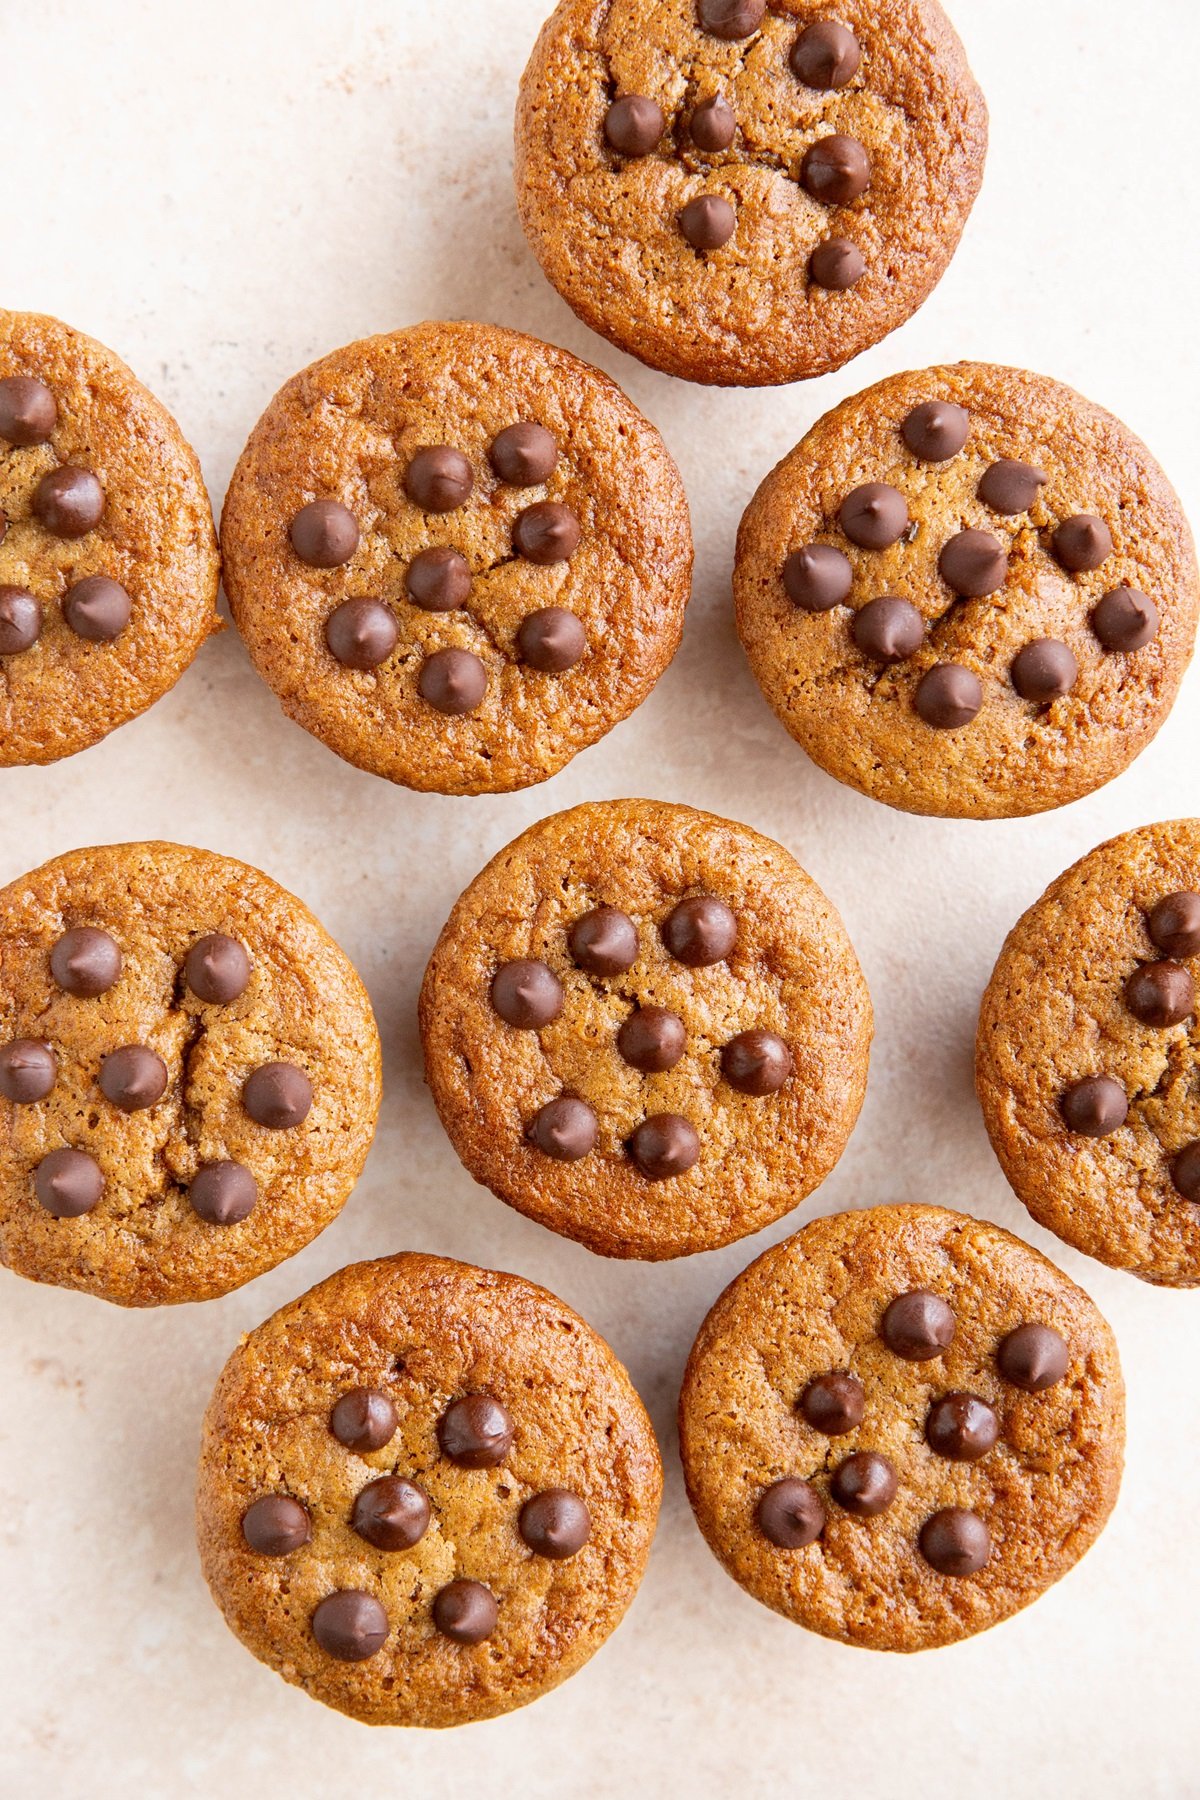 Sweet potato muffins with chocolate chips sitting on a background.